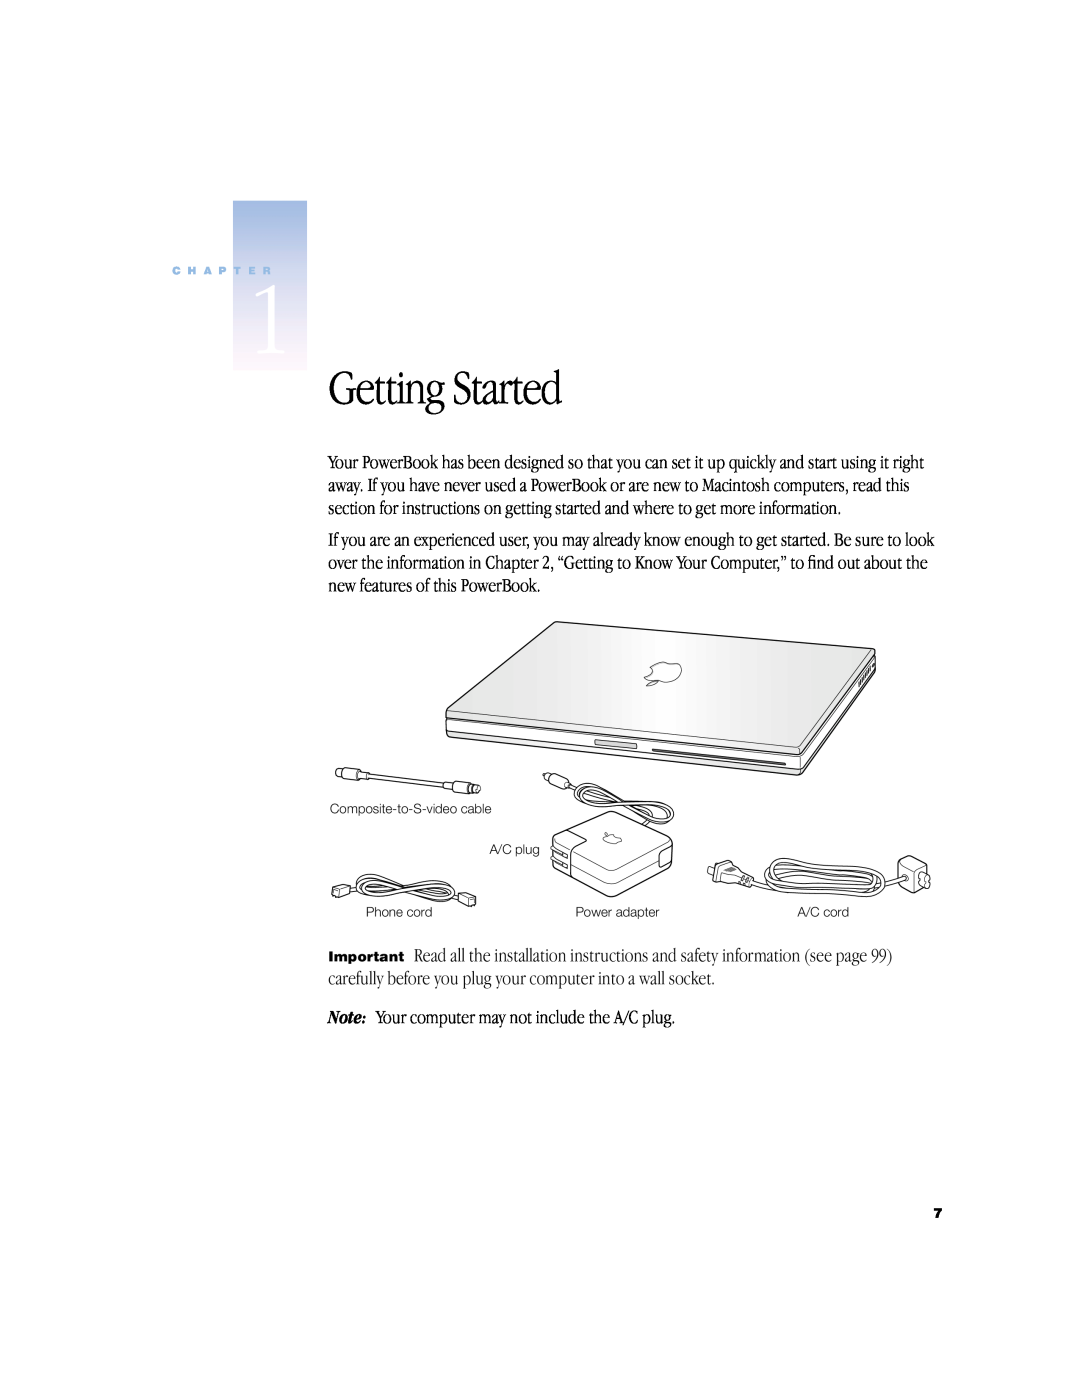 Apple powerbook g4 manual Getting Started, Note Your computer may not include the A/C plug 